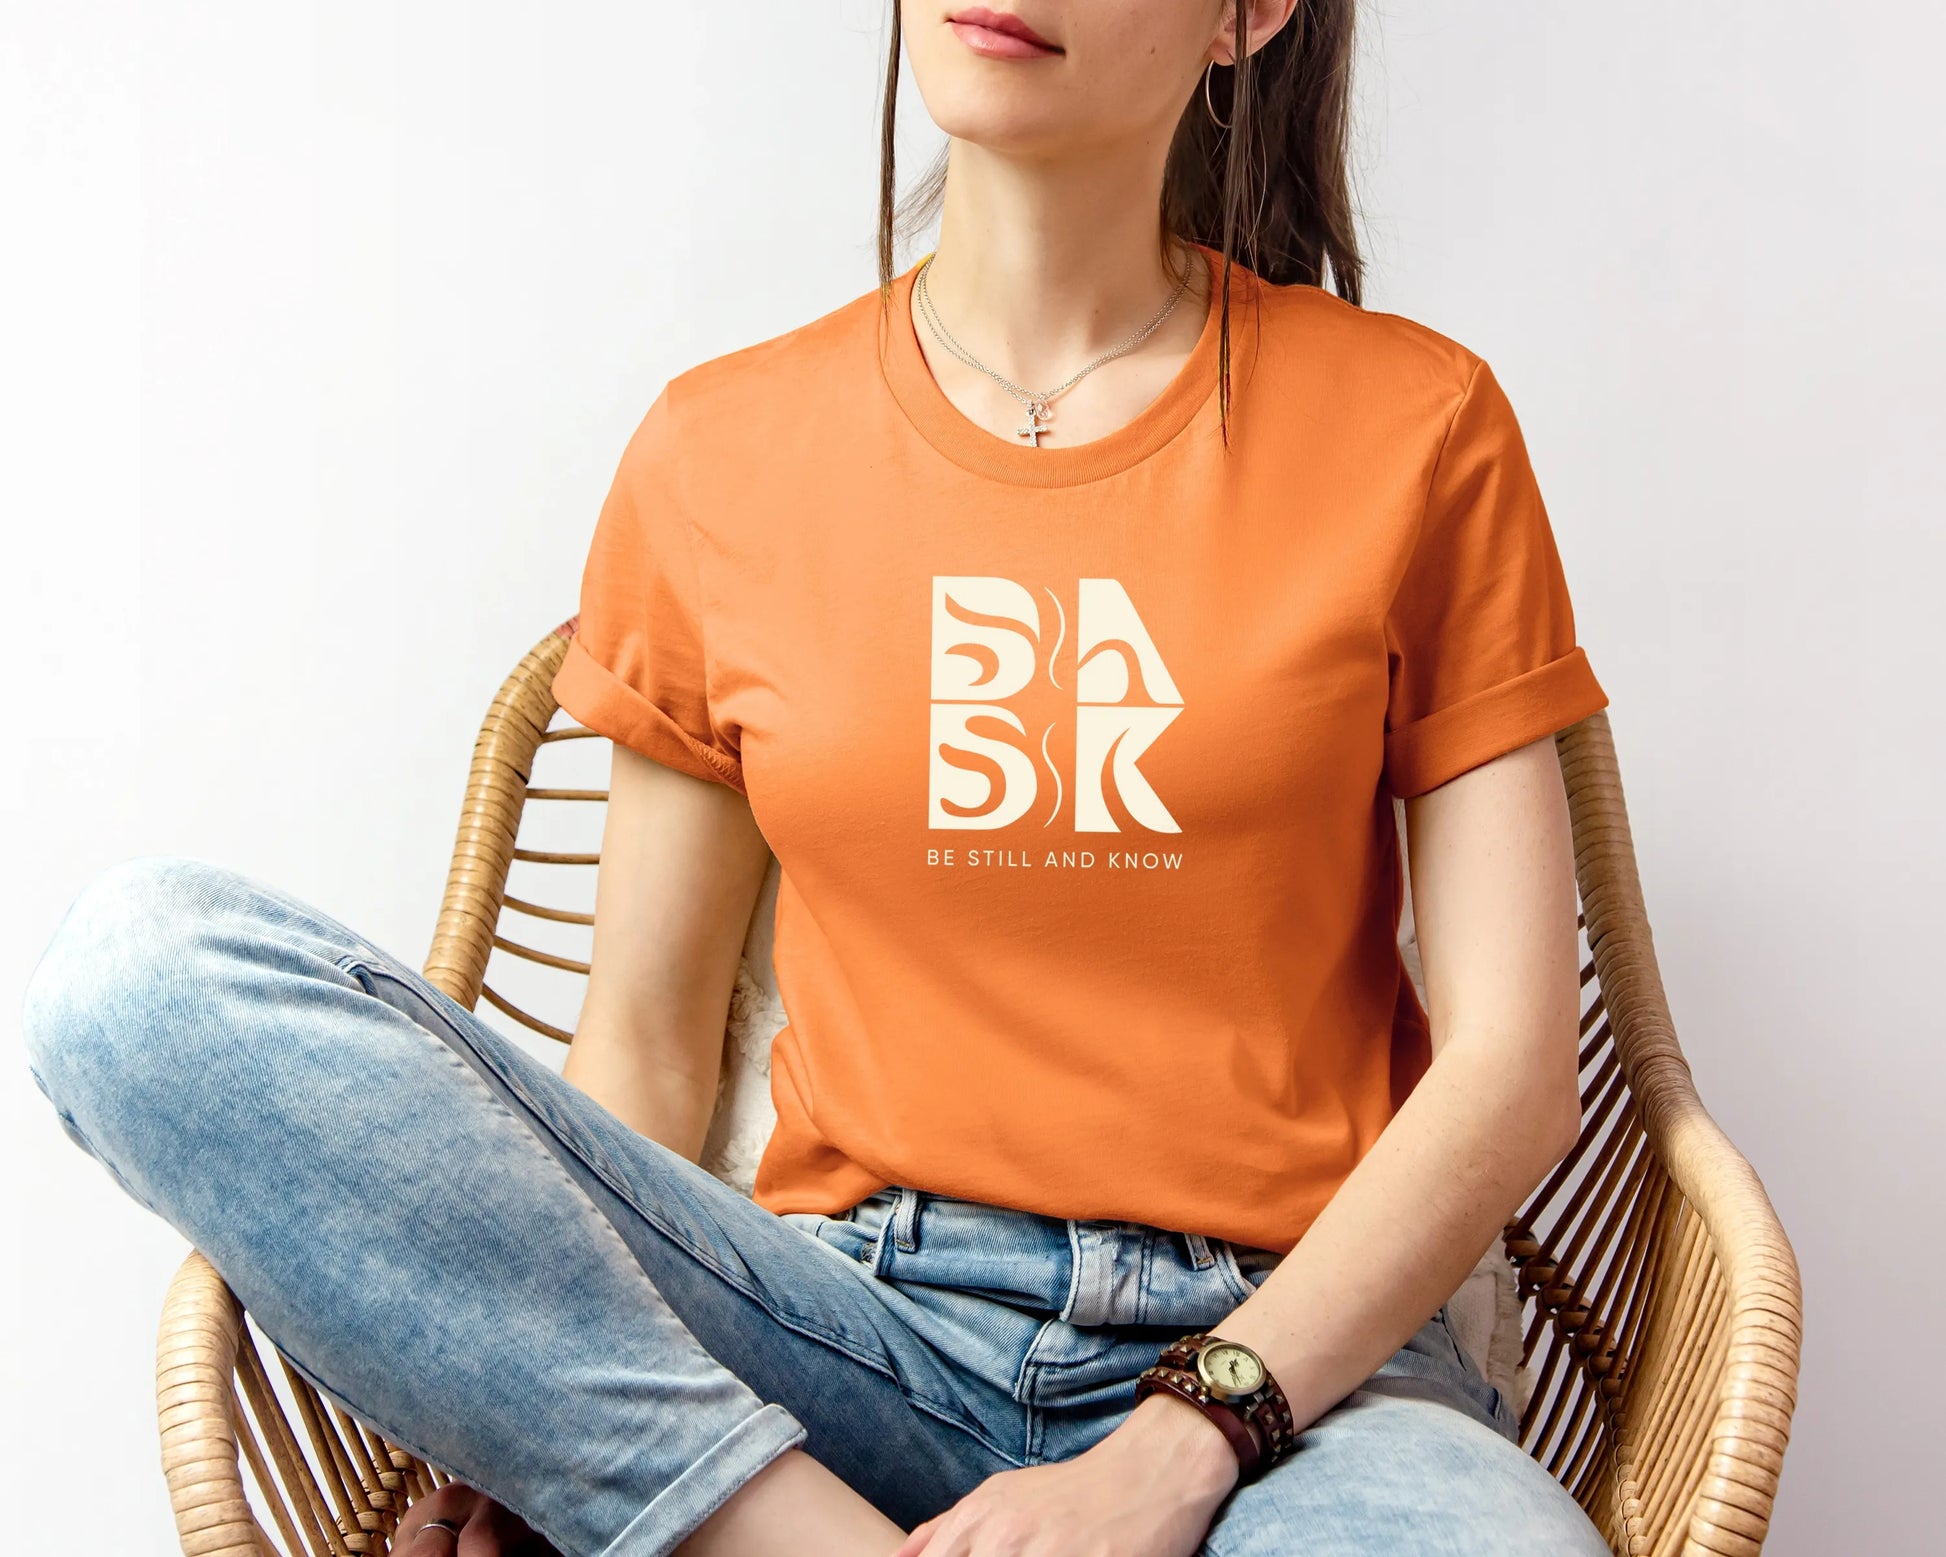 A woman wearing a Golden Coast Tee in Orange featuring the Be Still and Know logo sitting in a chair.